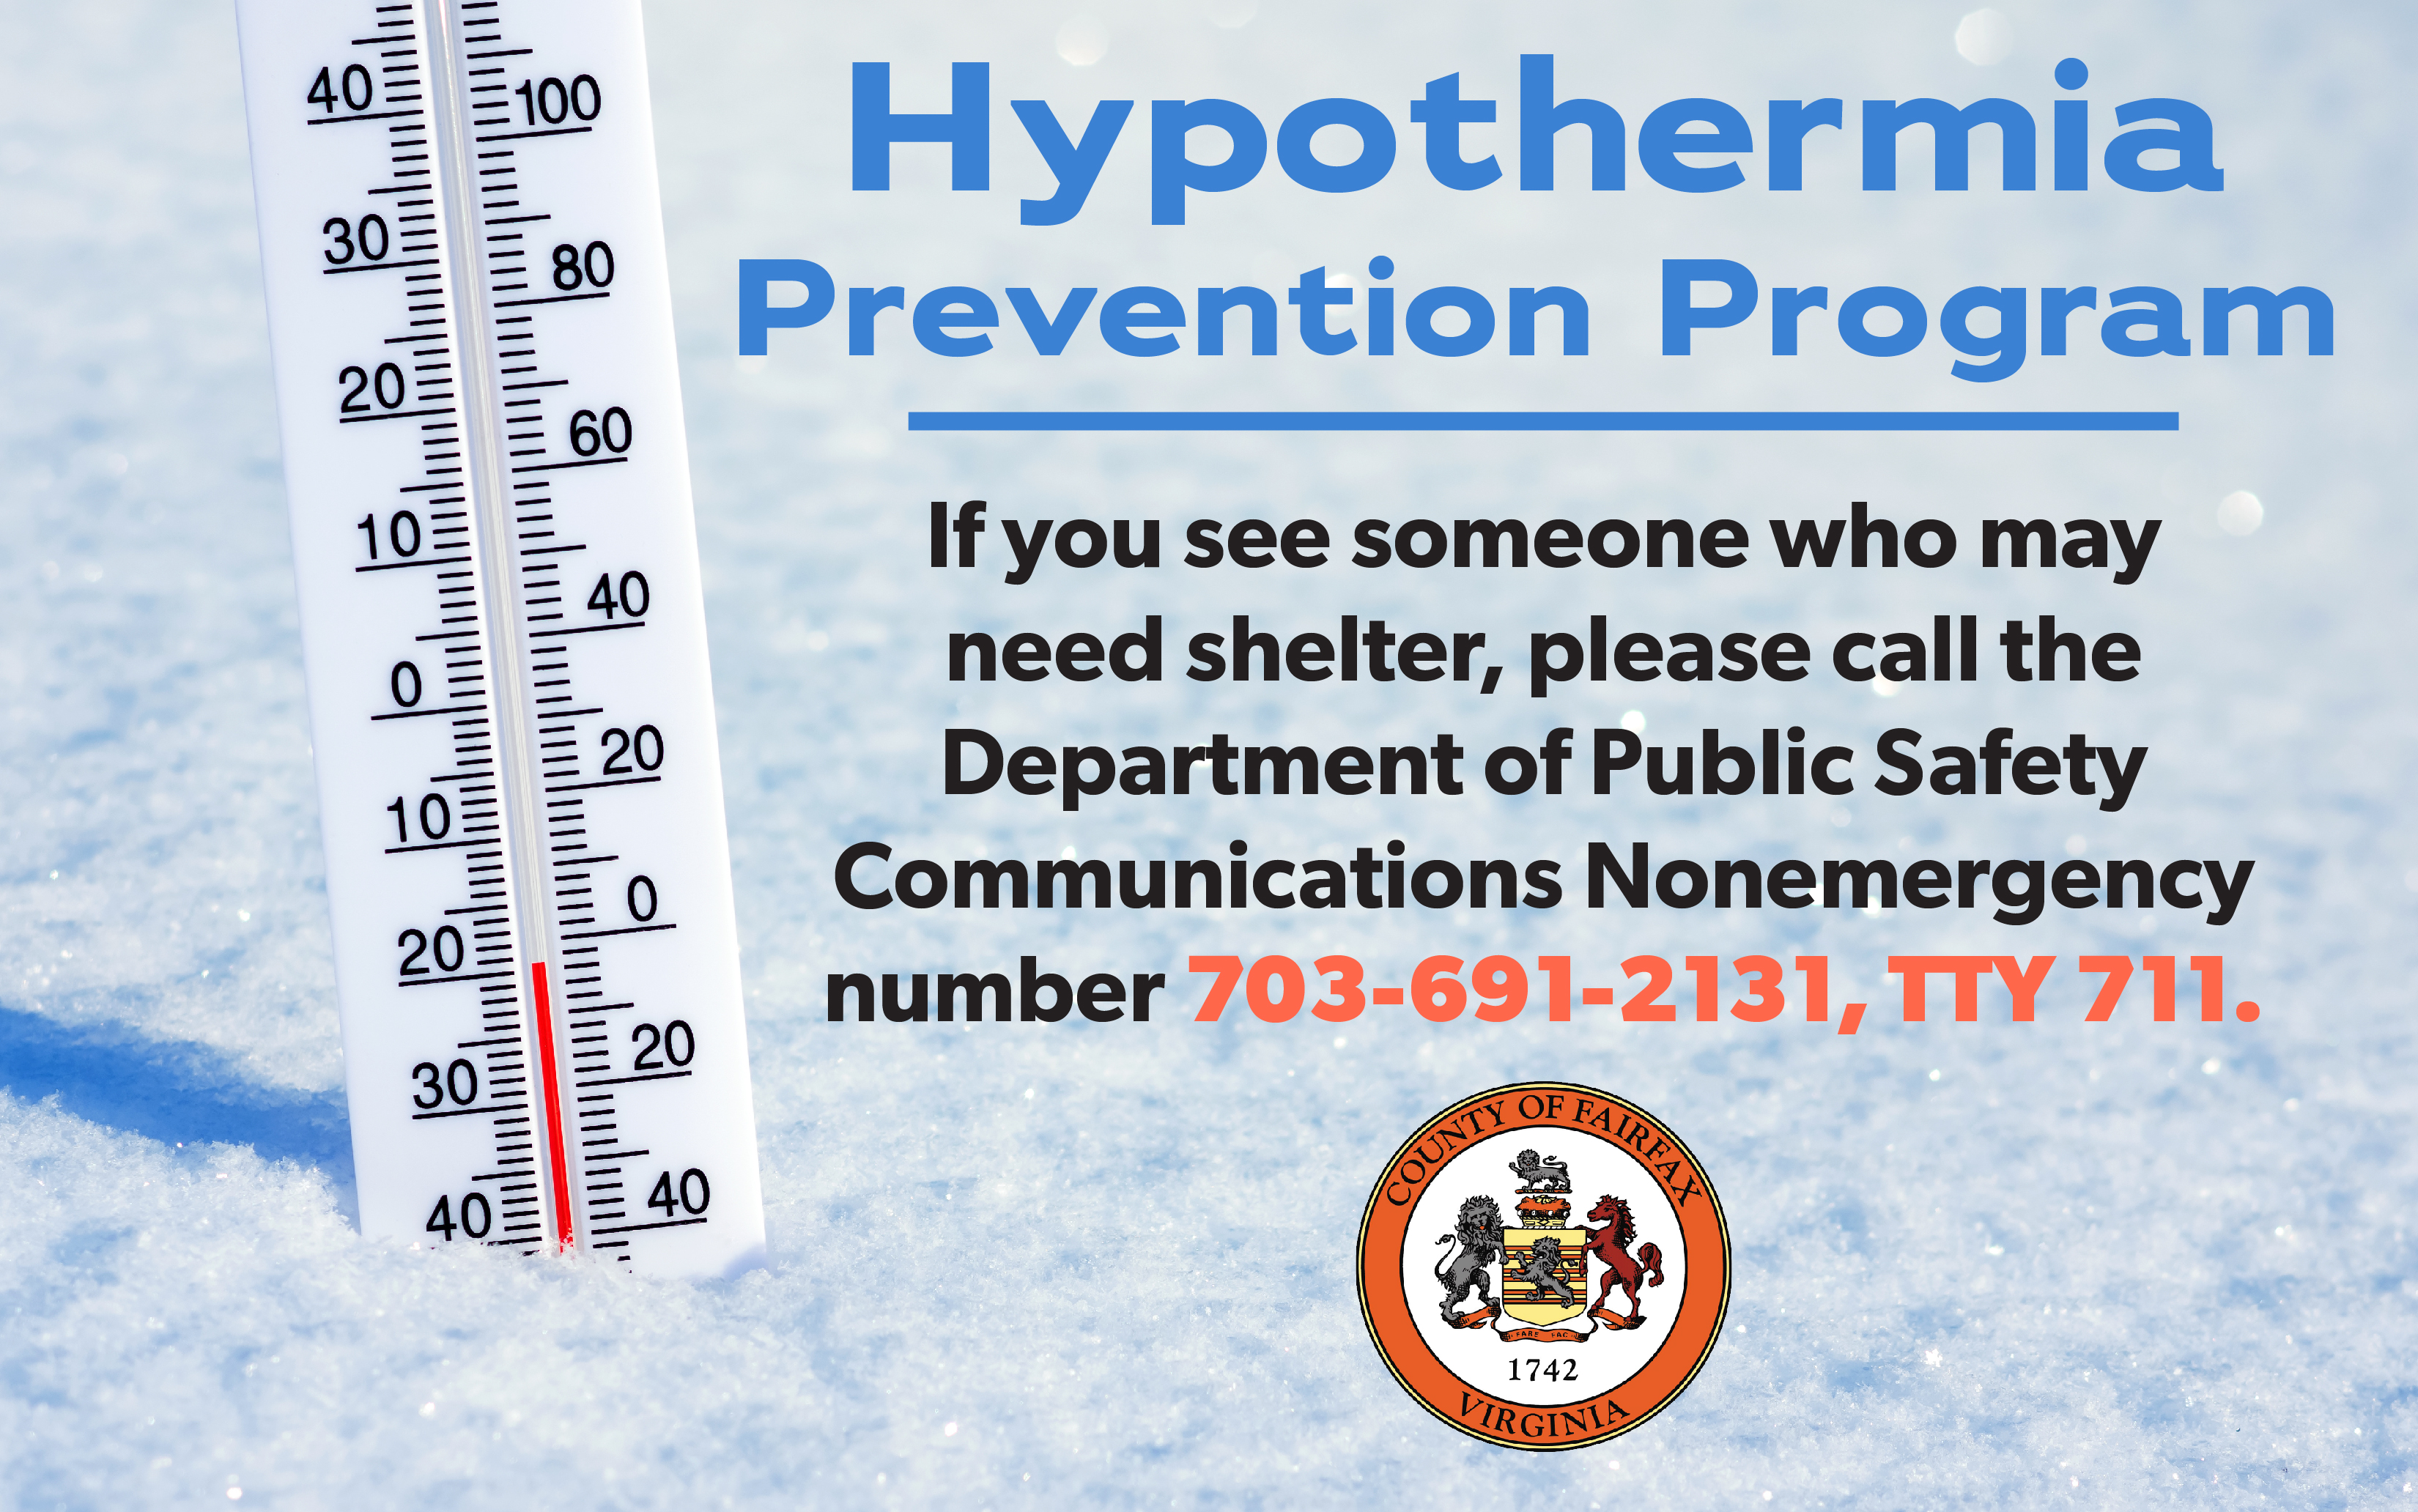 Hypothermia Prevention Page